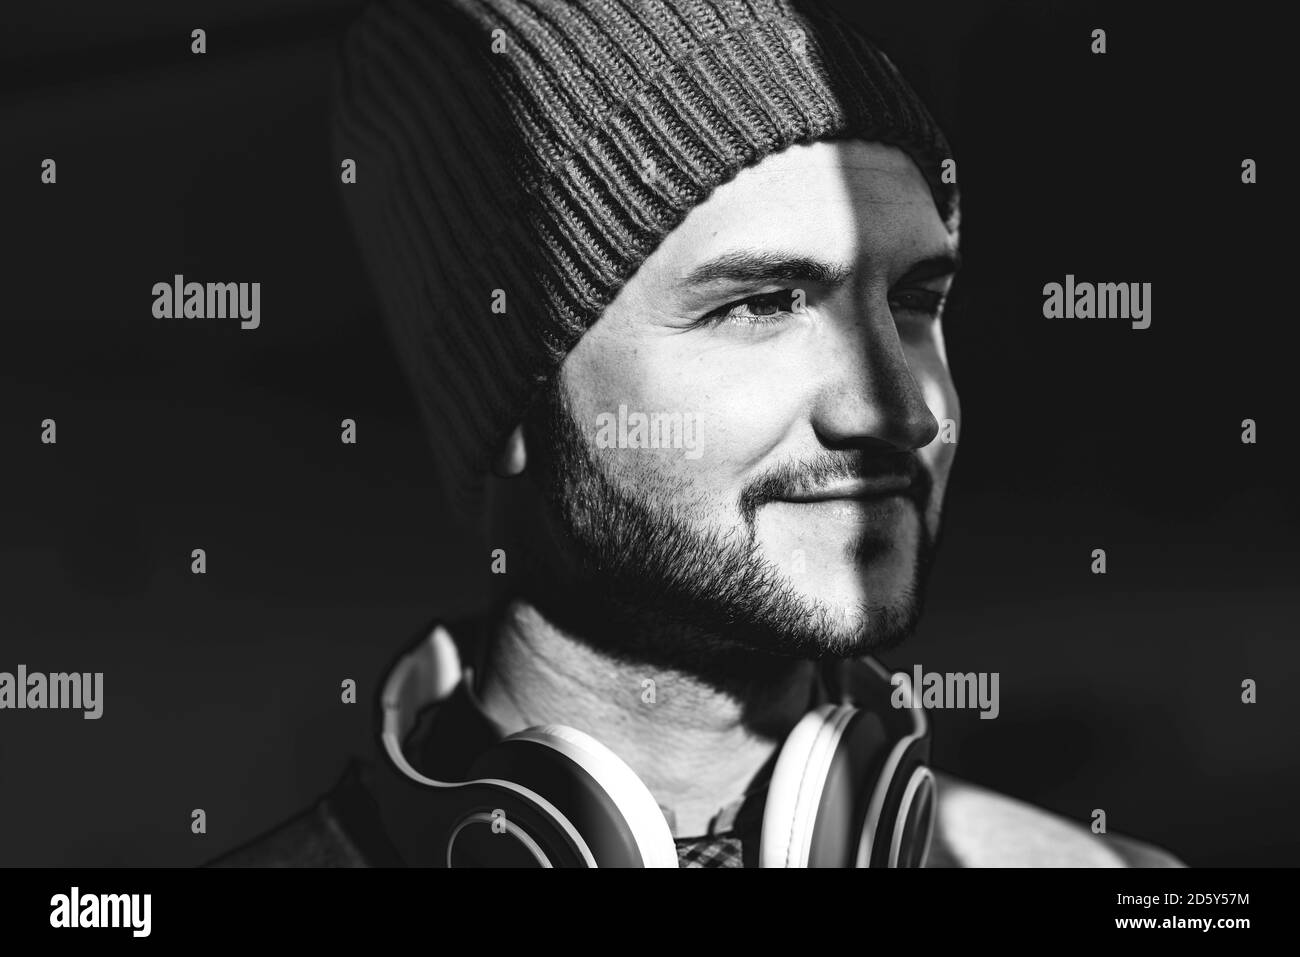 Smiling young man with wooly hat Stock Photo